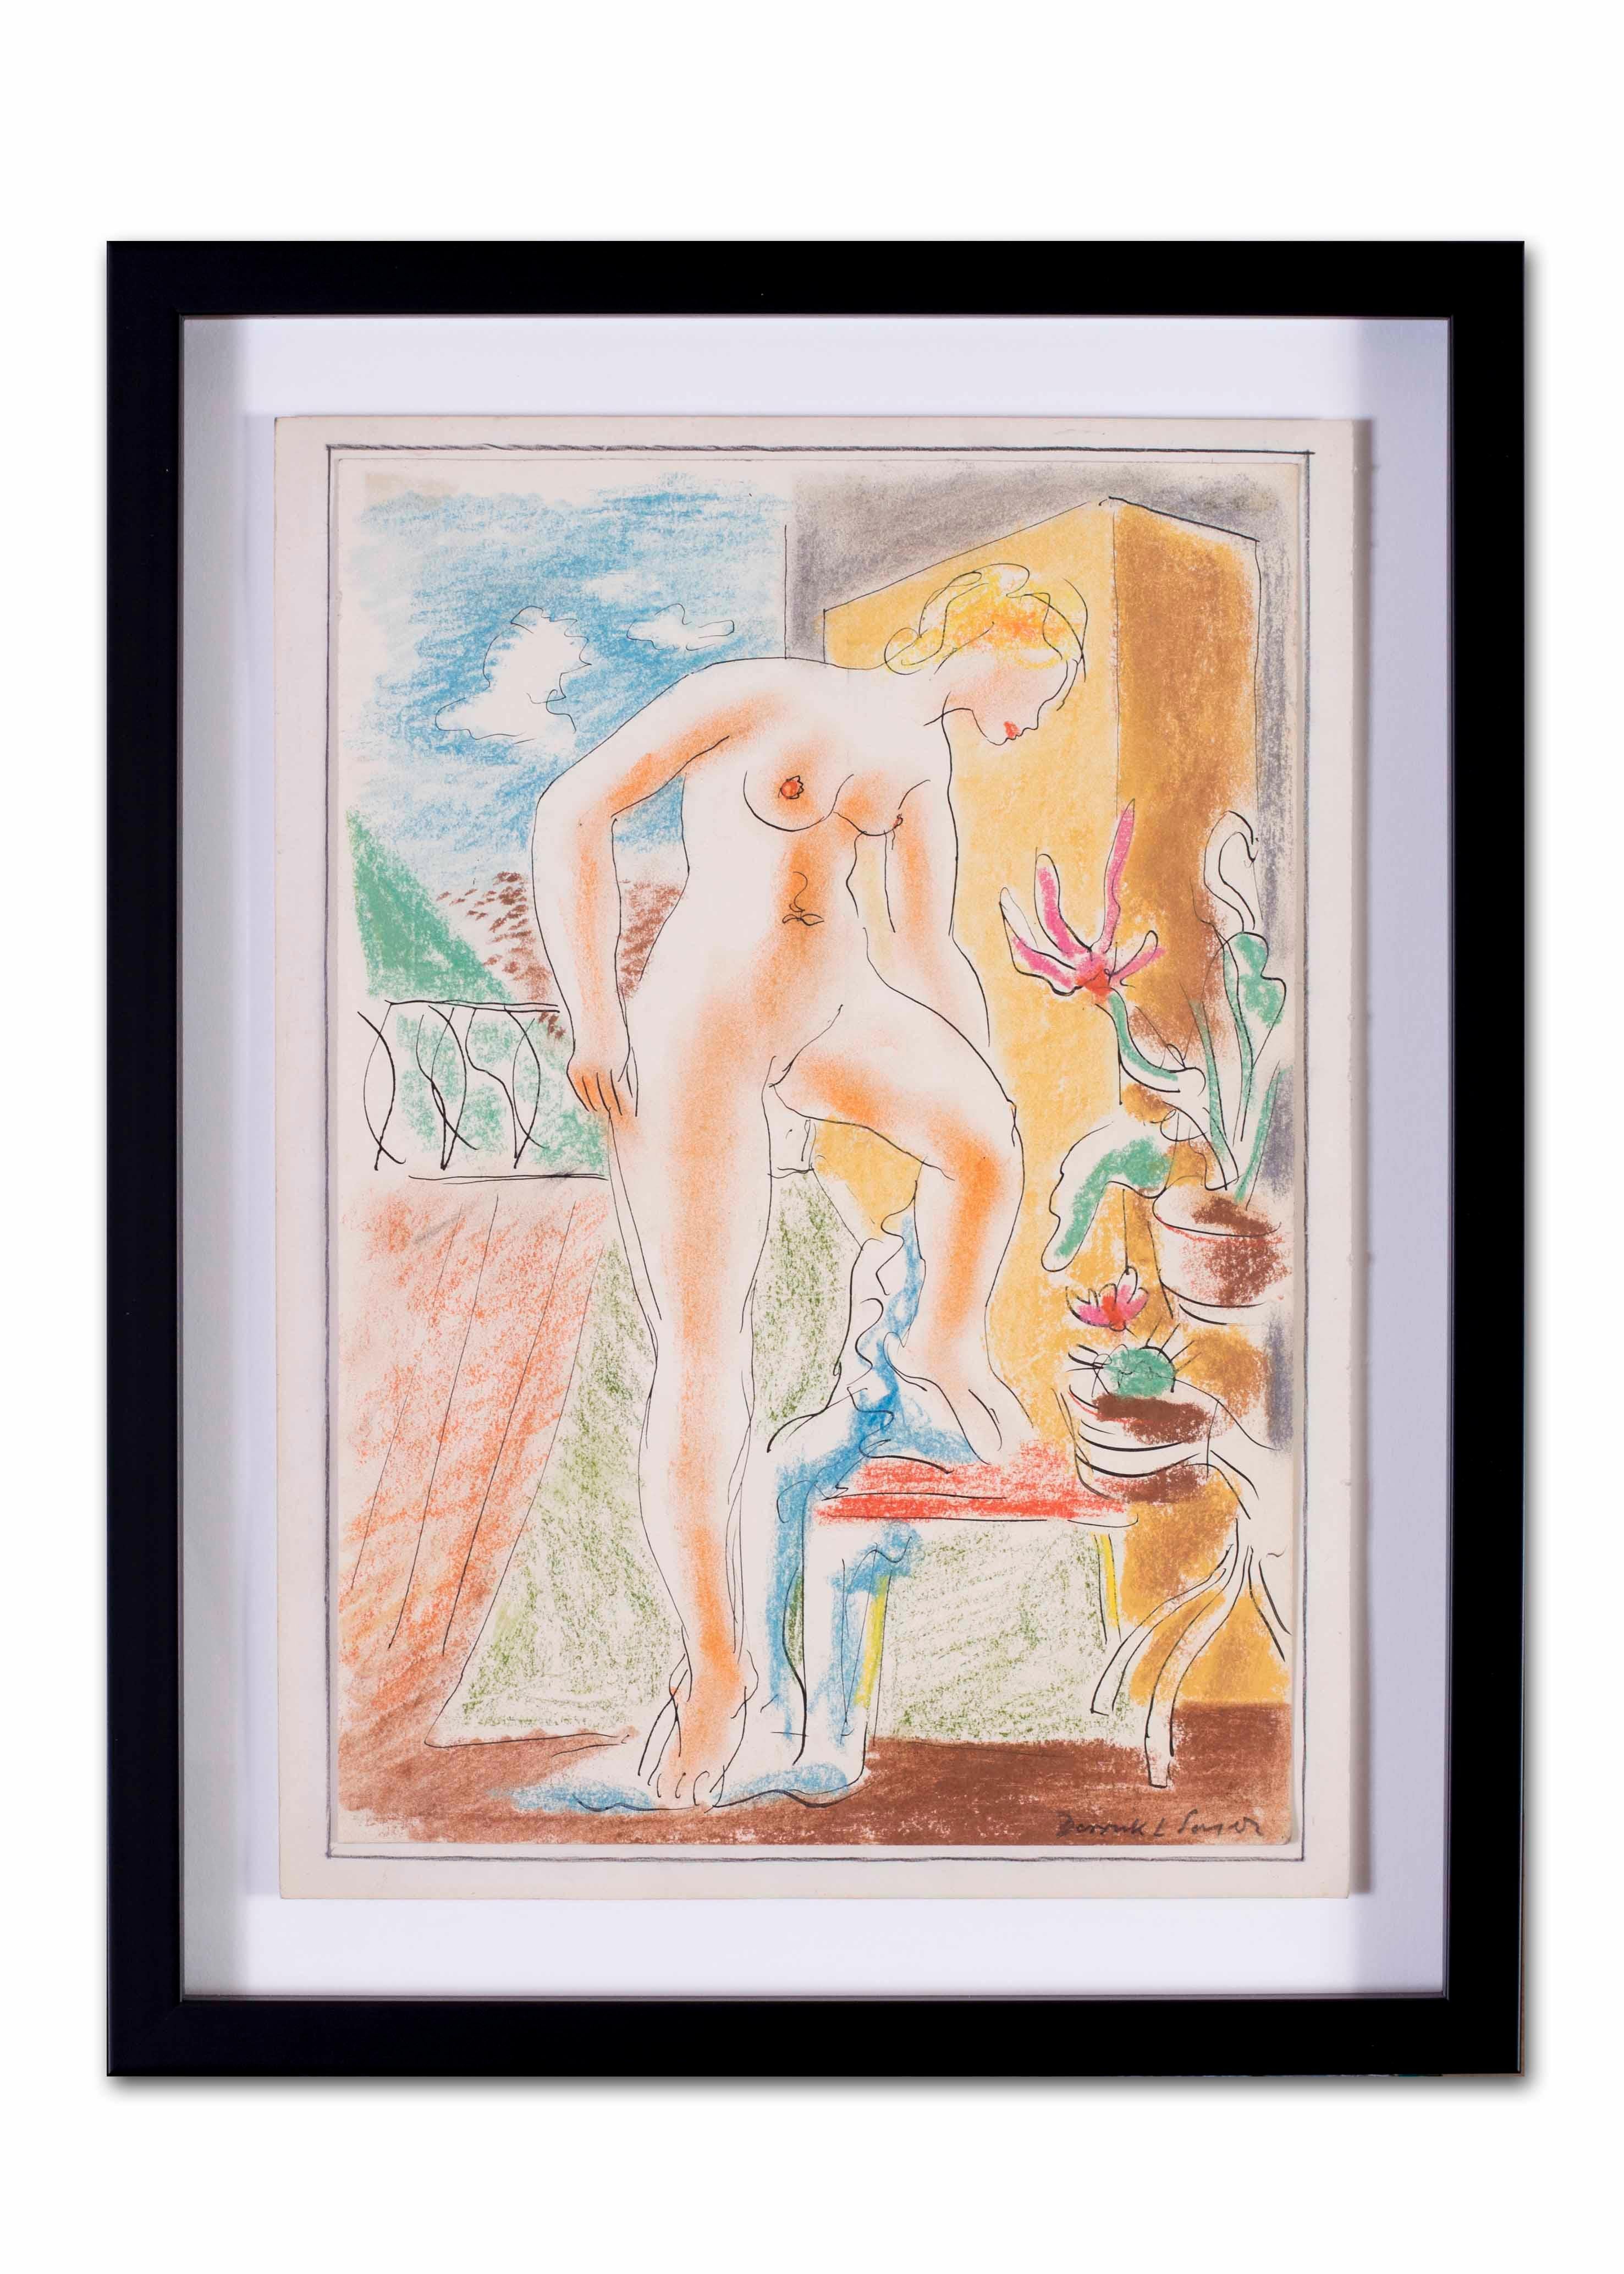 British Mid 20th Century ink and pastel on paper drawing of a bather, nude 1